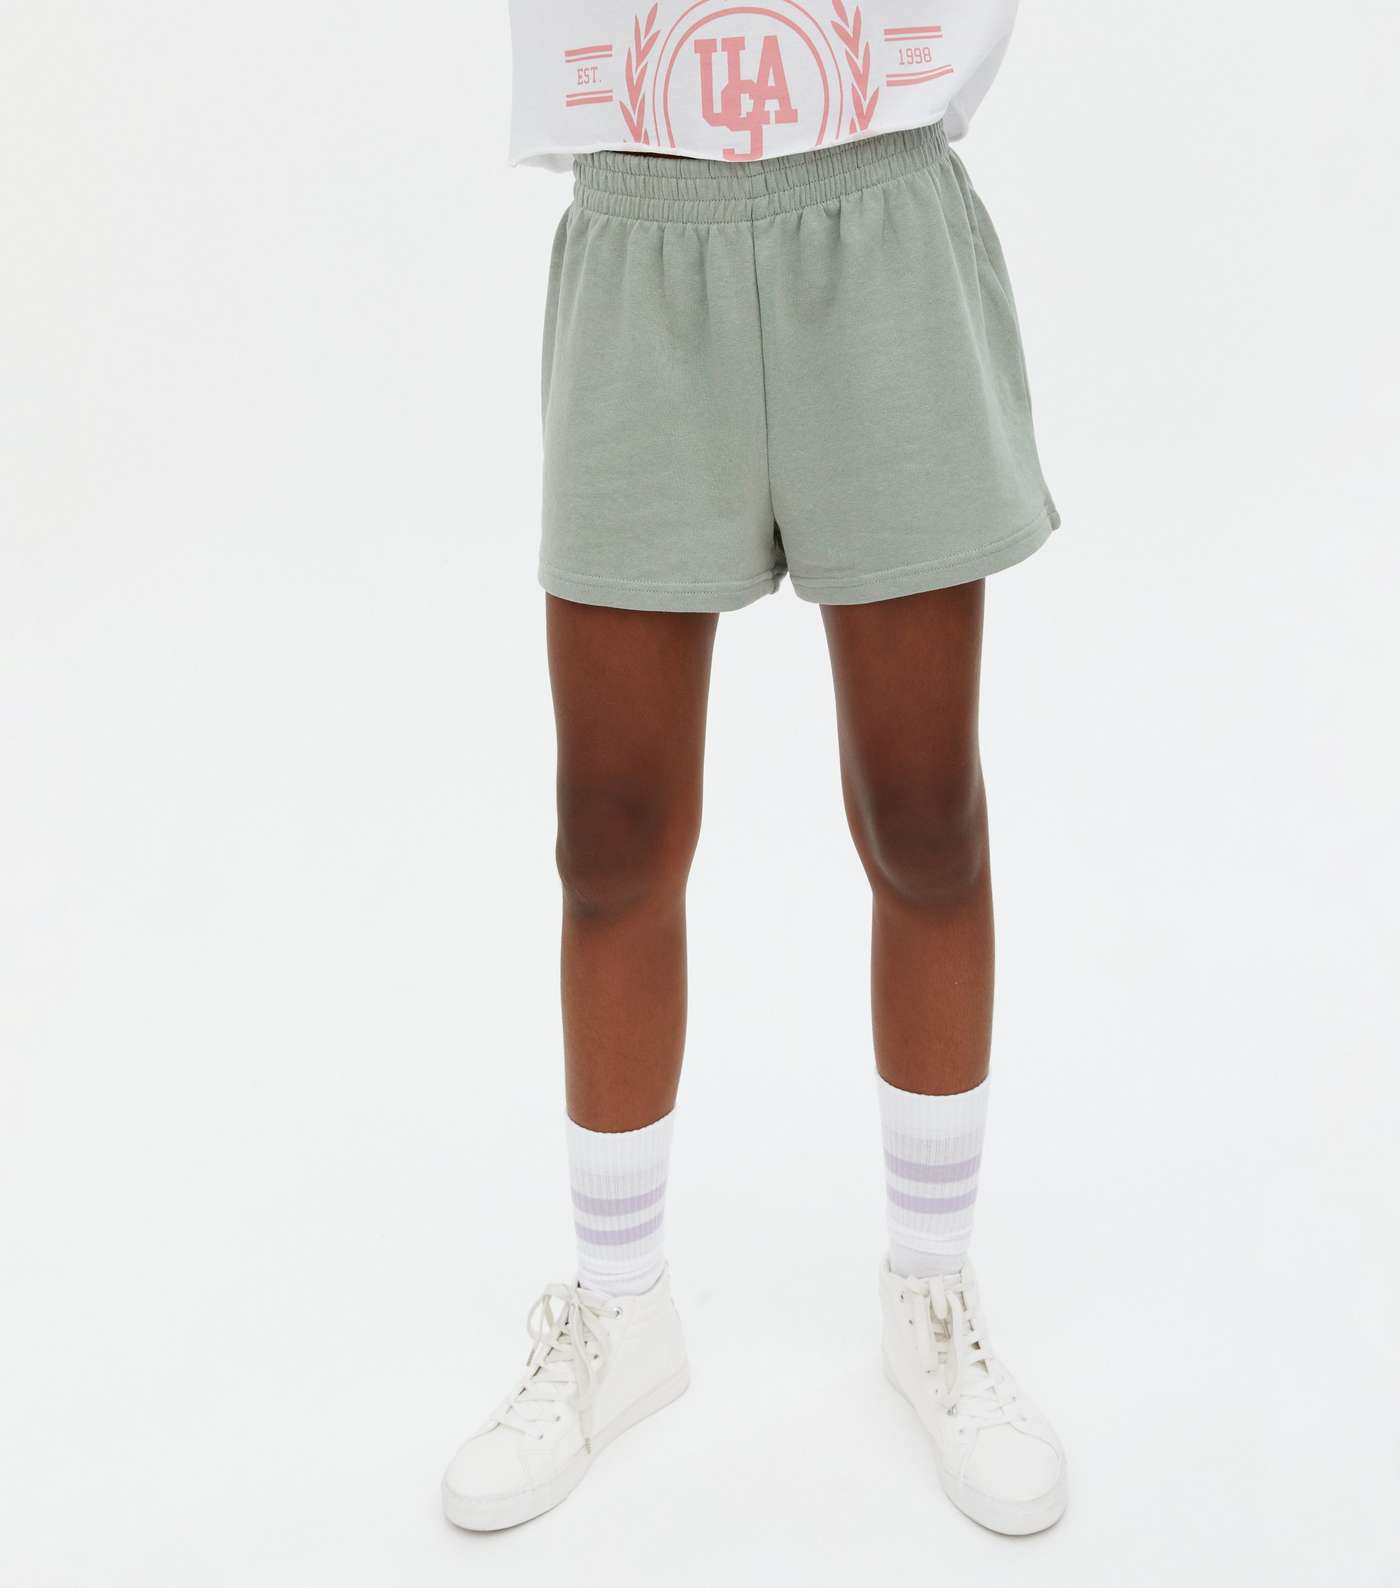 Girls 2 Pack Light Green and Grey Jersey Shorts Image 2